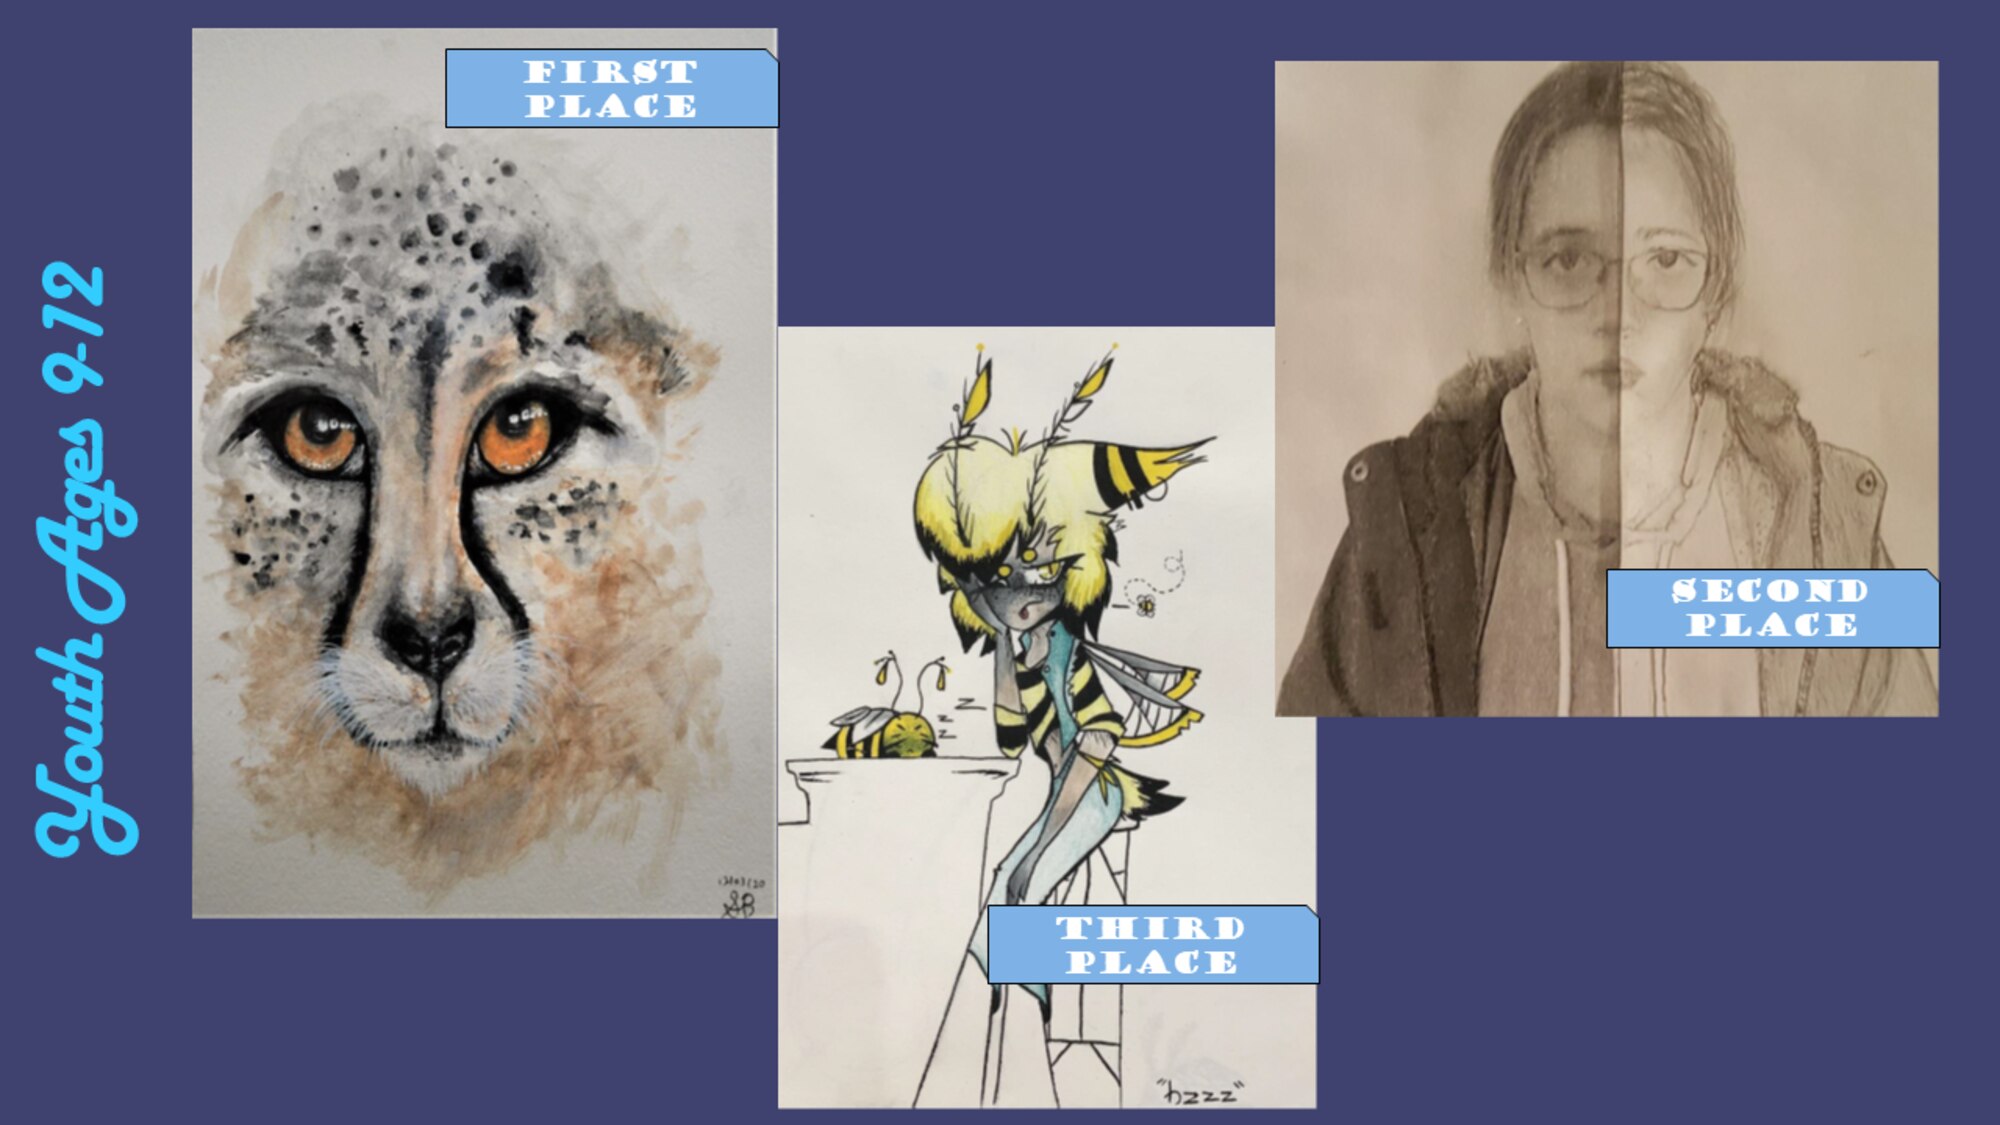 The Air Force Services Center recently announced the winners of the annual Air Force Art Contest.